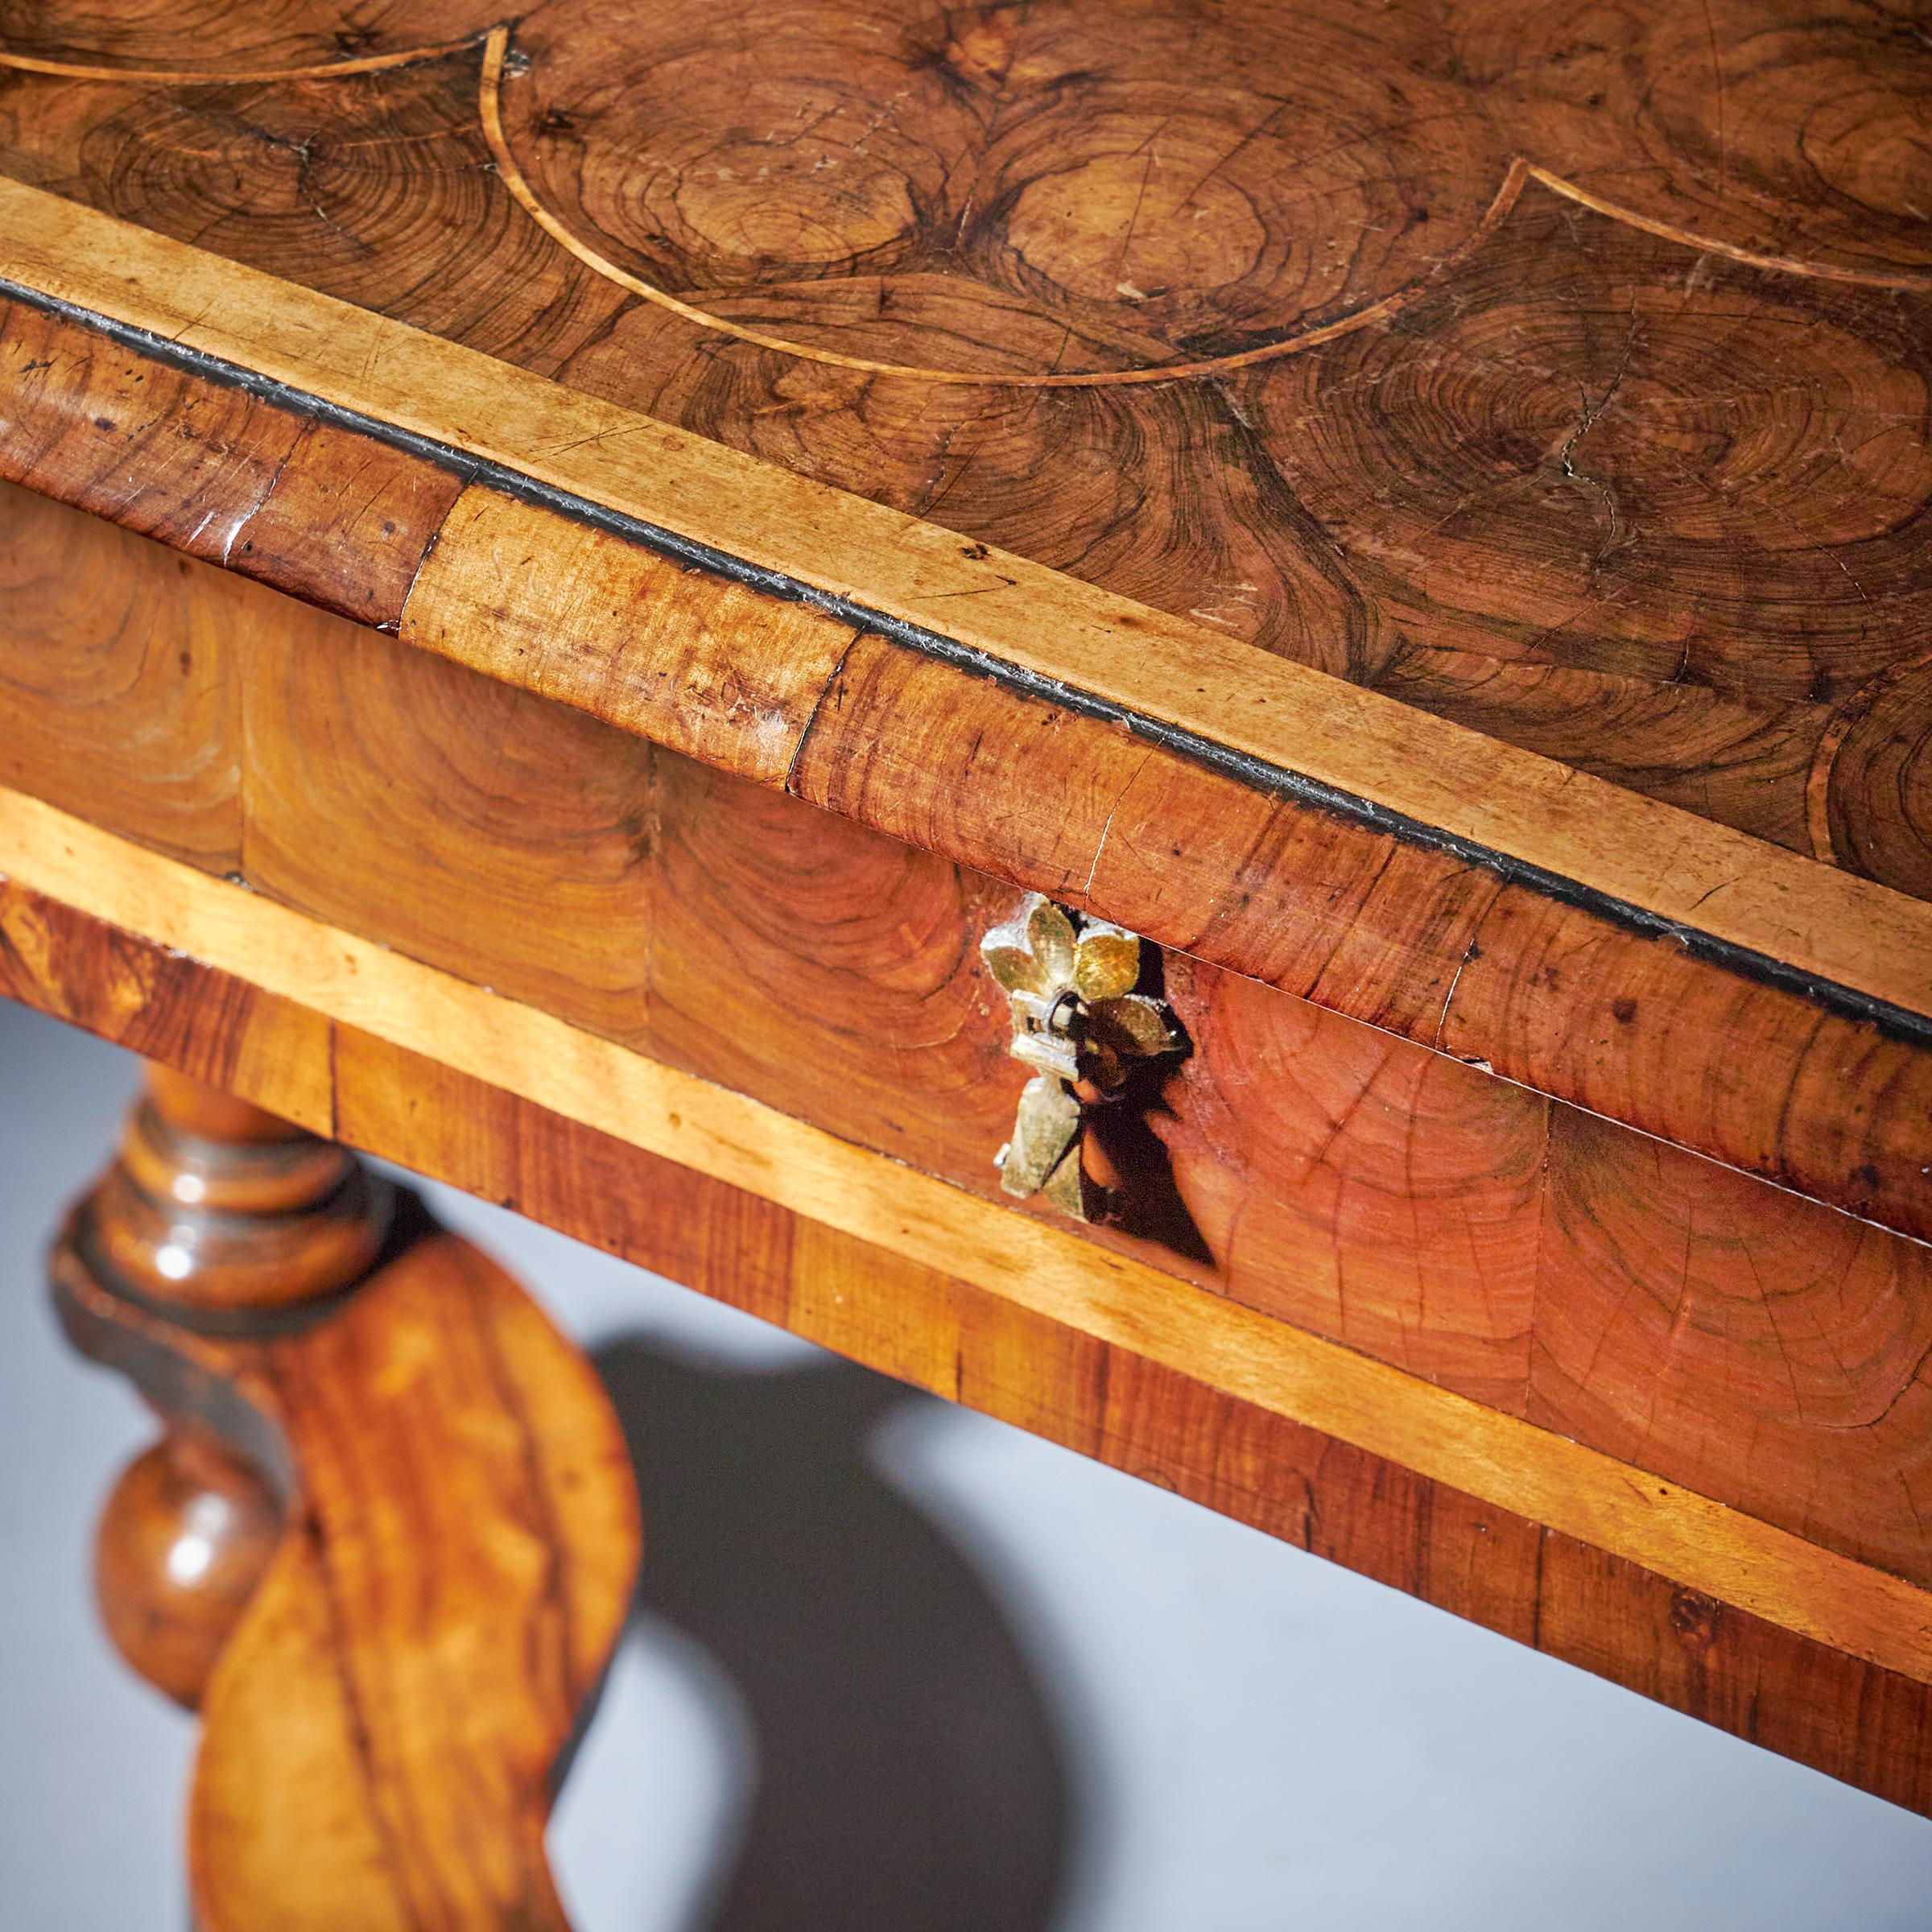 17th Century William and Mary Olive Oyster Table, Circa 1680-1700 11